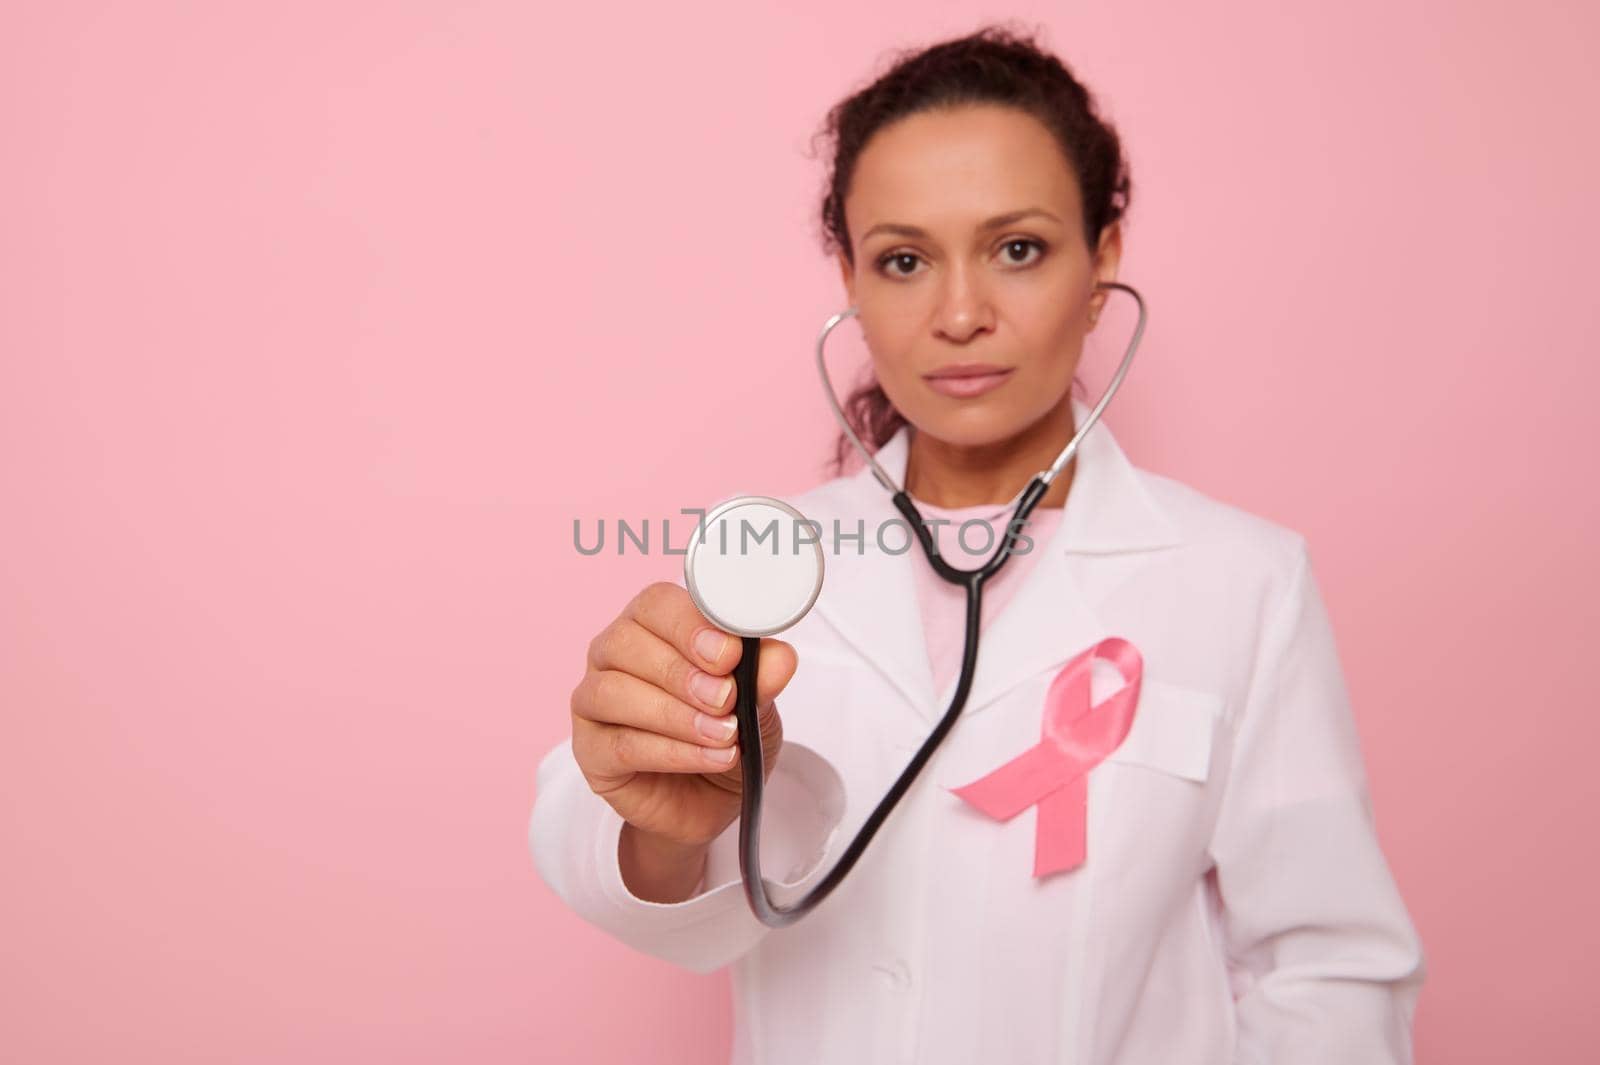 Focus on phonendoscope in the hands of beautiful mixed race Hispanic doctor in medical coat with pink satin ribbon, symbol of Global Breast Cancer awareness Day, 1 st October . Woman's health concept by artgf